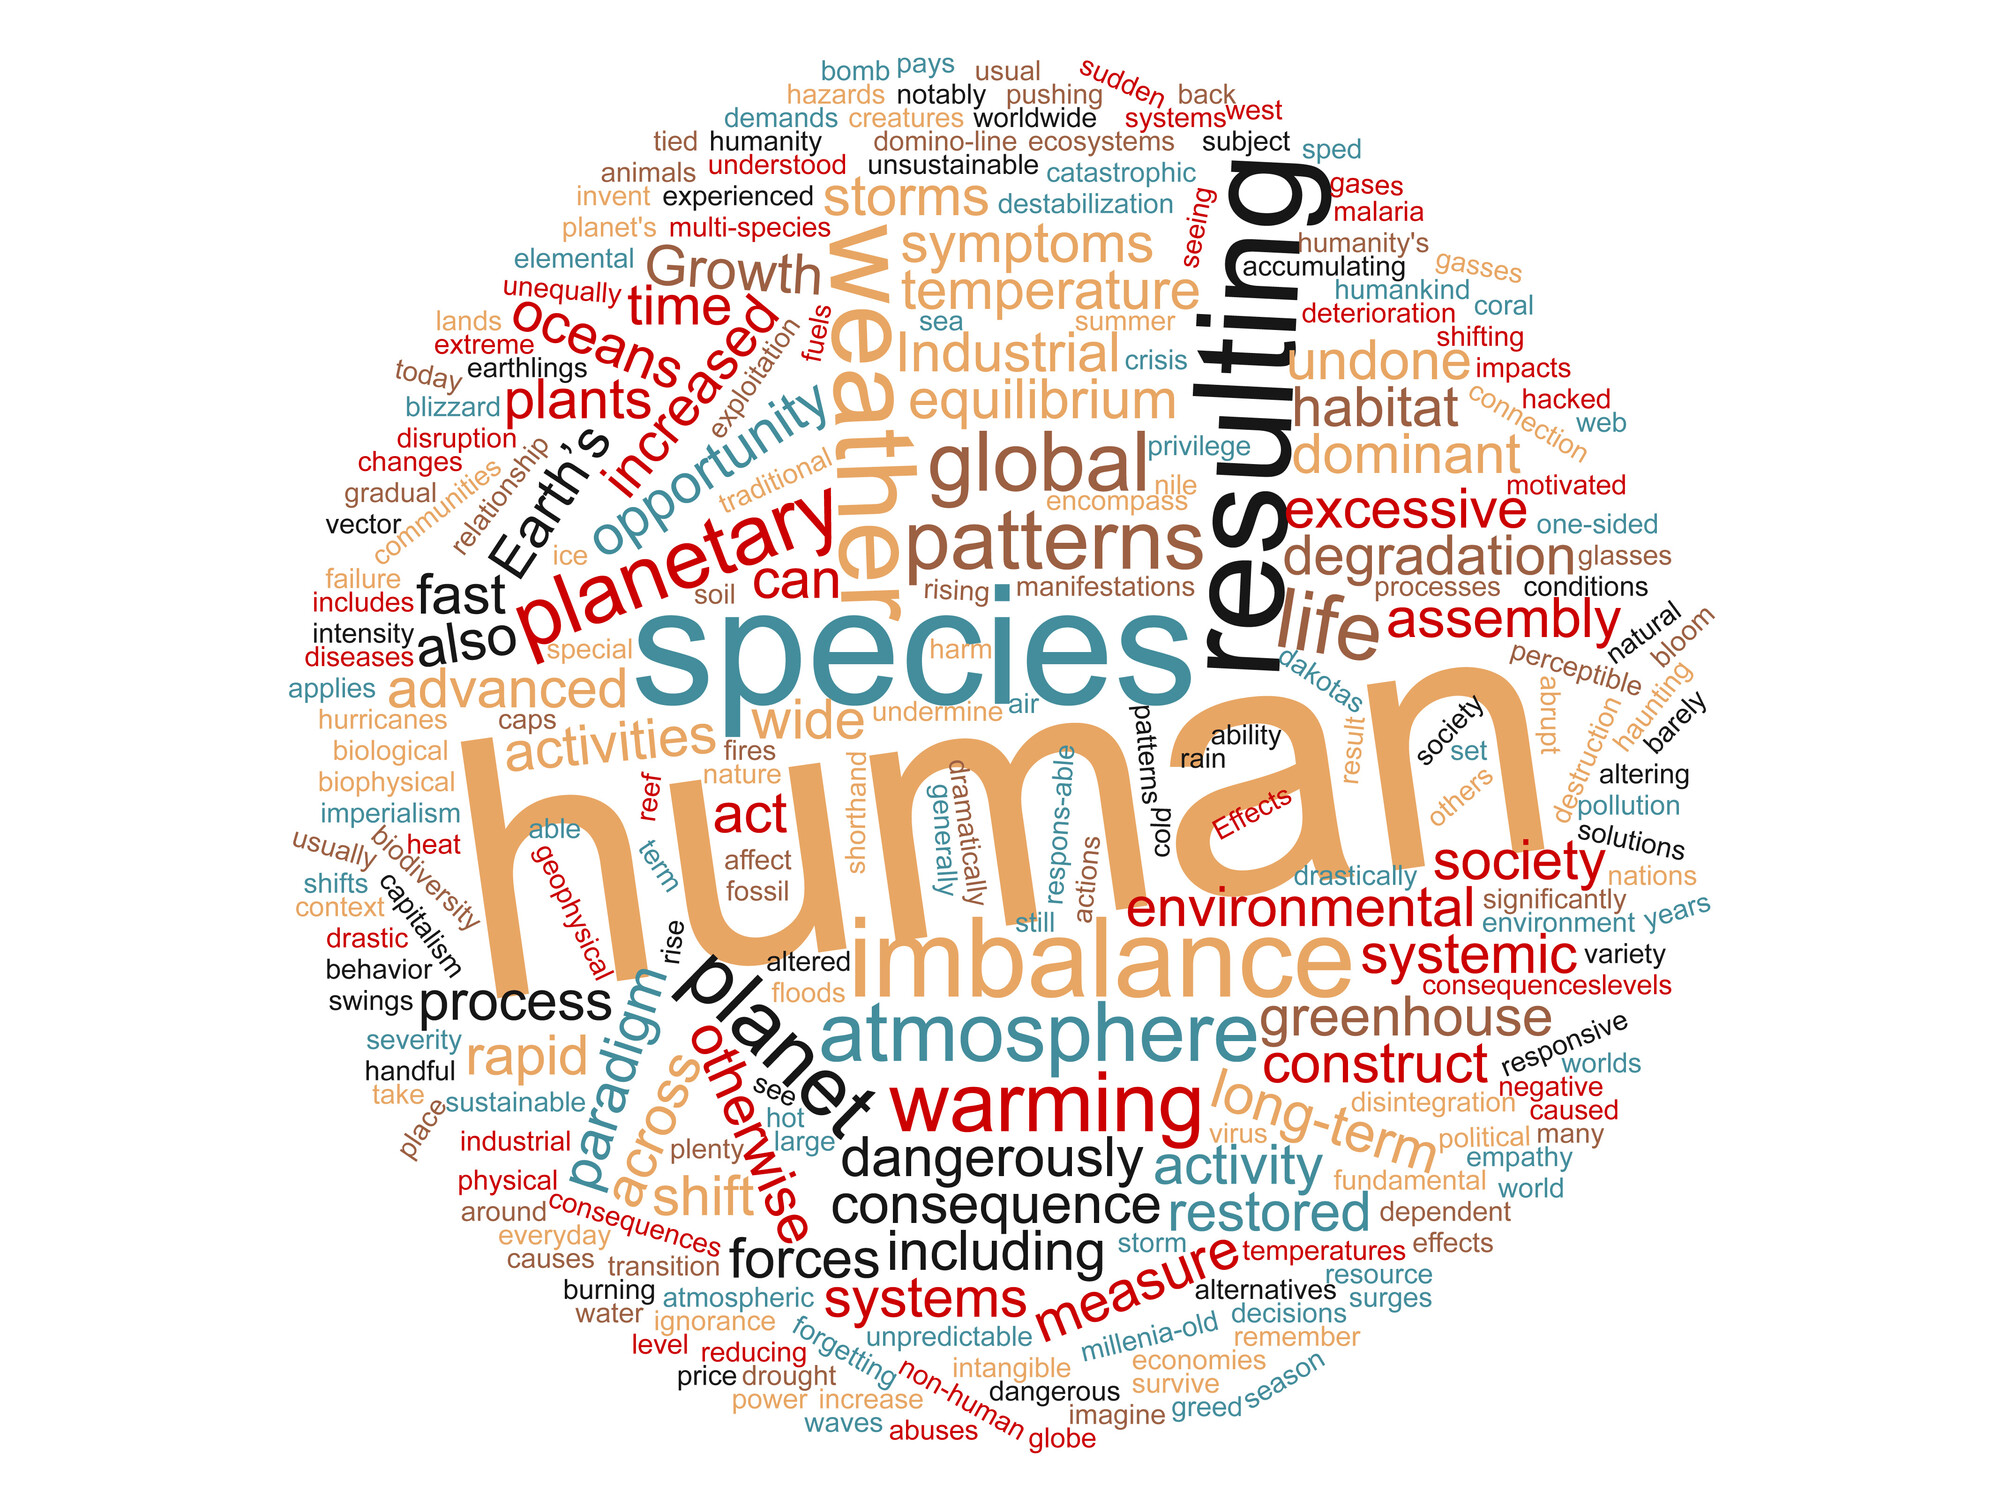 Word cloud featuring words like humans, species, warming, consequence, global.